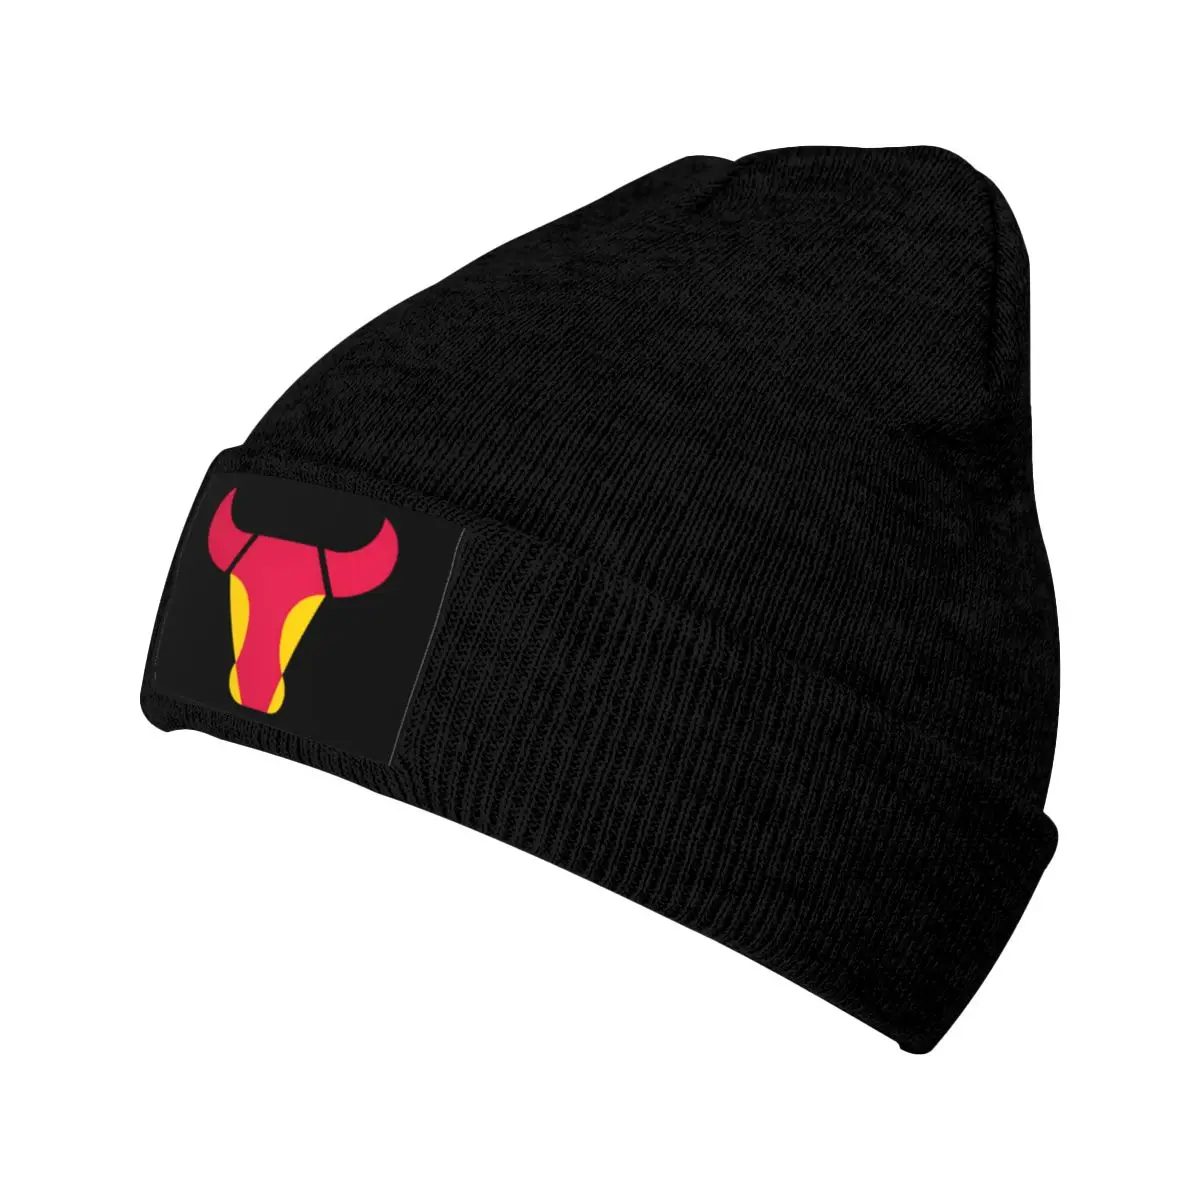 

Cool Double-Bulls Racing Merch Warm Winter Extreme Athlete Reds Sports Beanie Hat For Men Women Bonnet Knitted Skull Cap